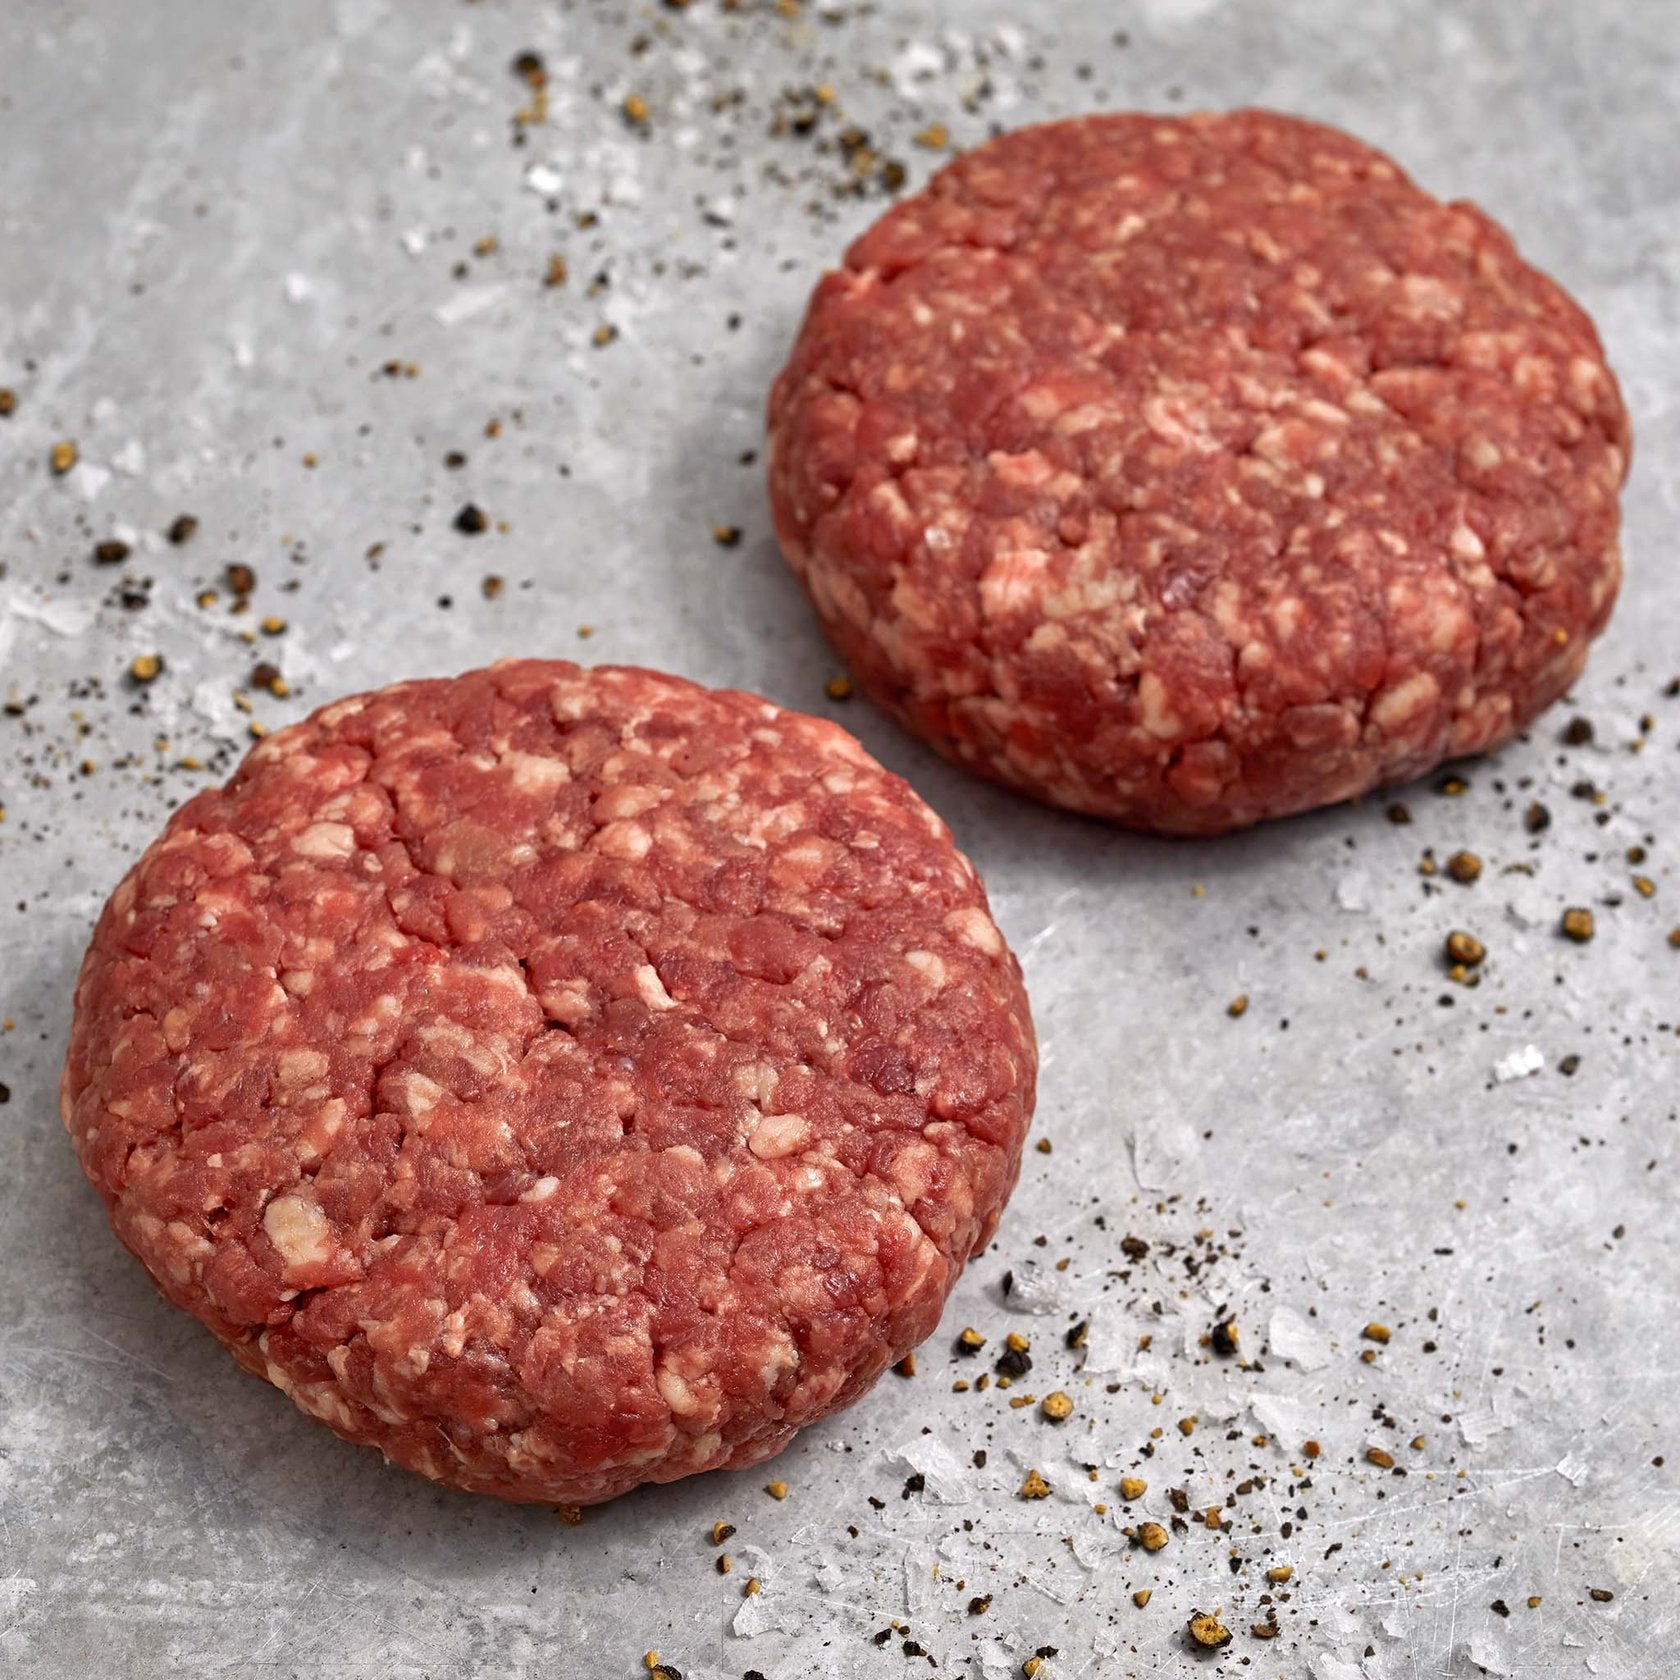 THICK ANGUS BEEF CHEF STYLE BURGERS